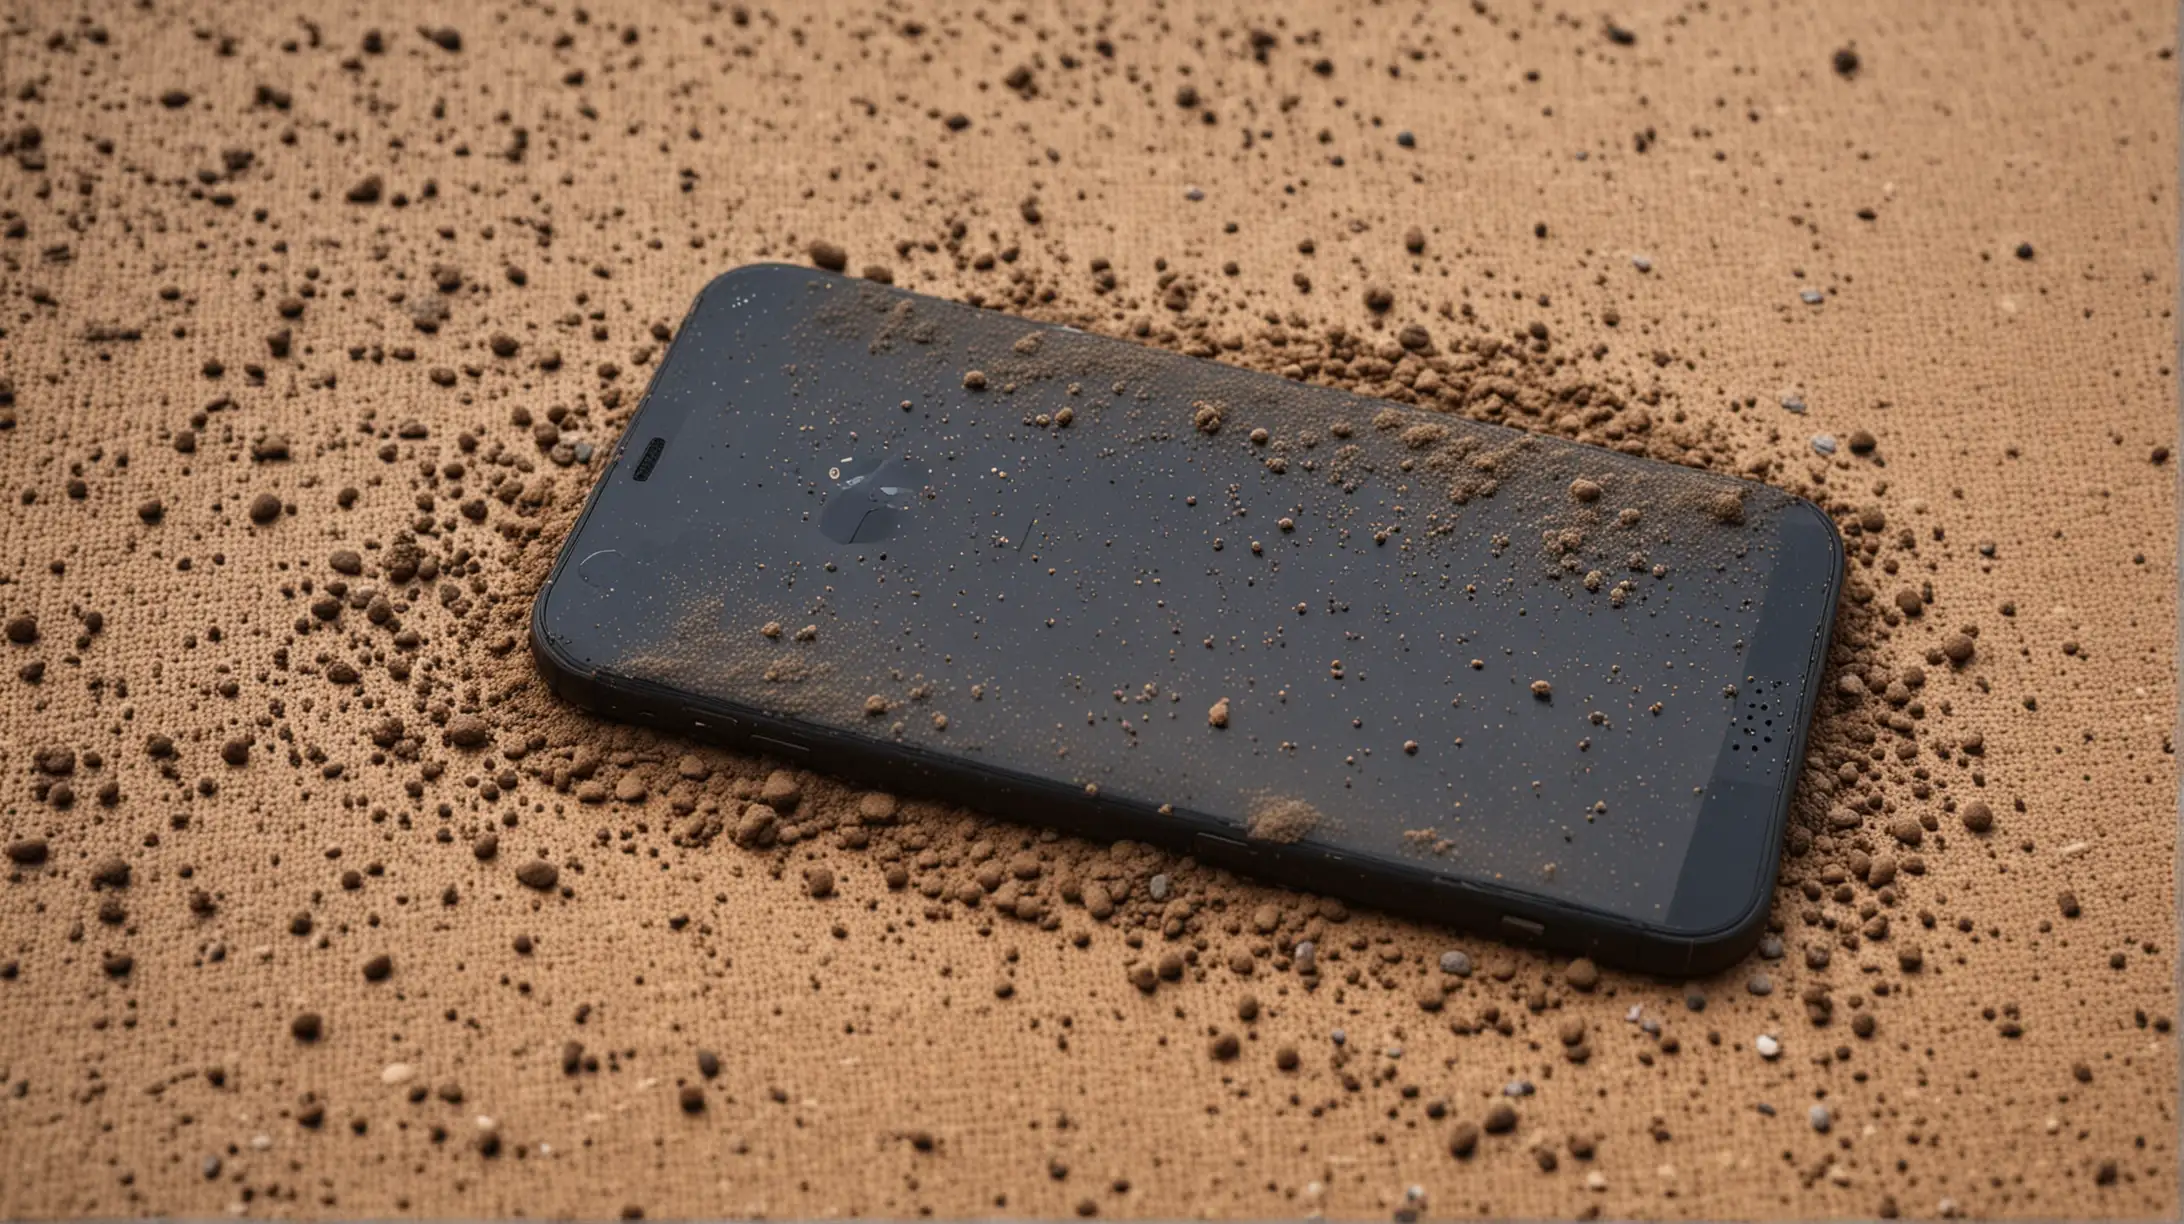 Phone Covered in Dust and Dirt Neglected Smartphone Accumulating Grime